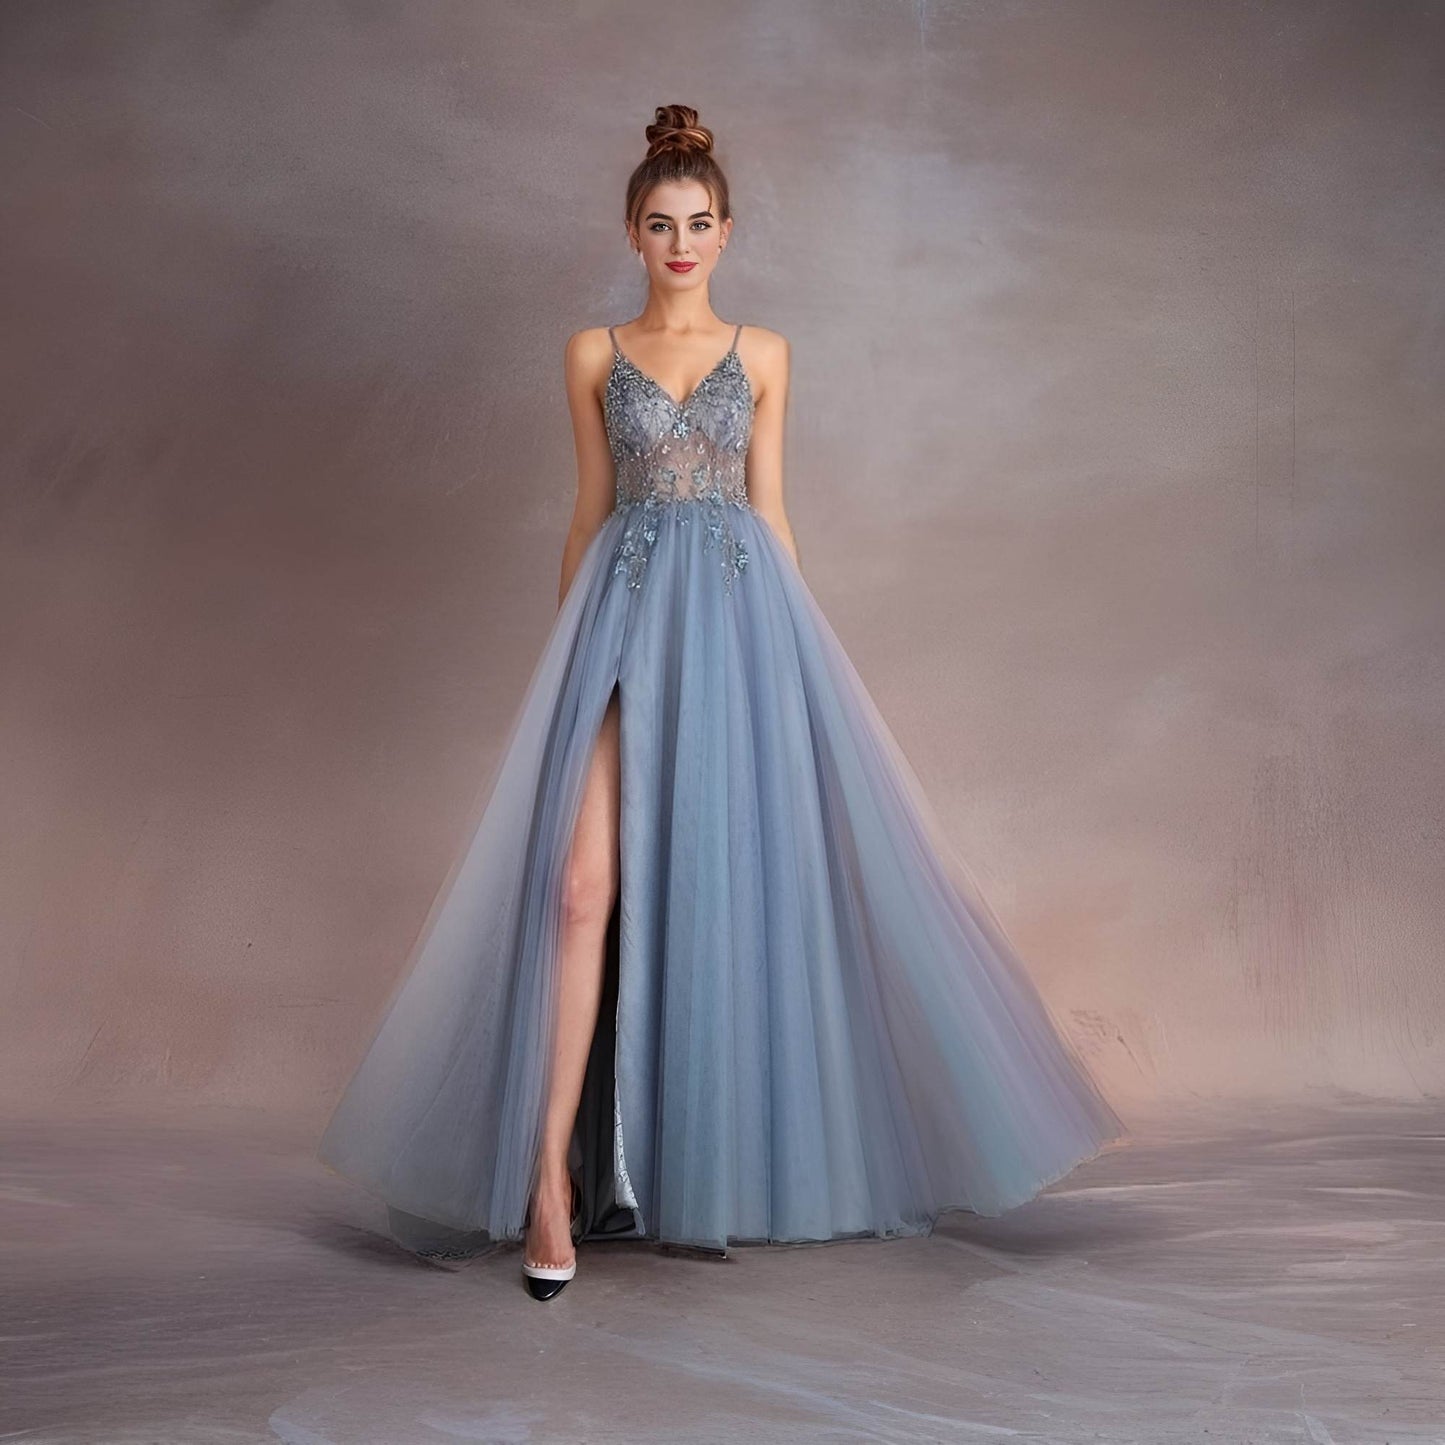 GISELLE Formal Couture Dress